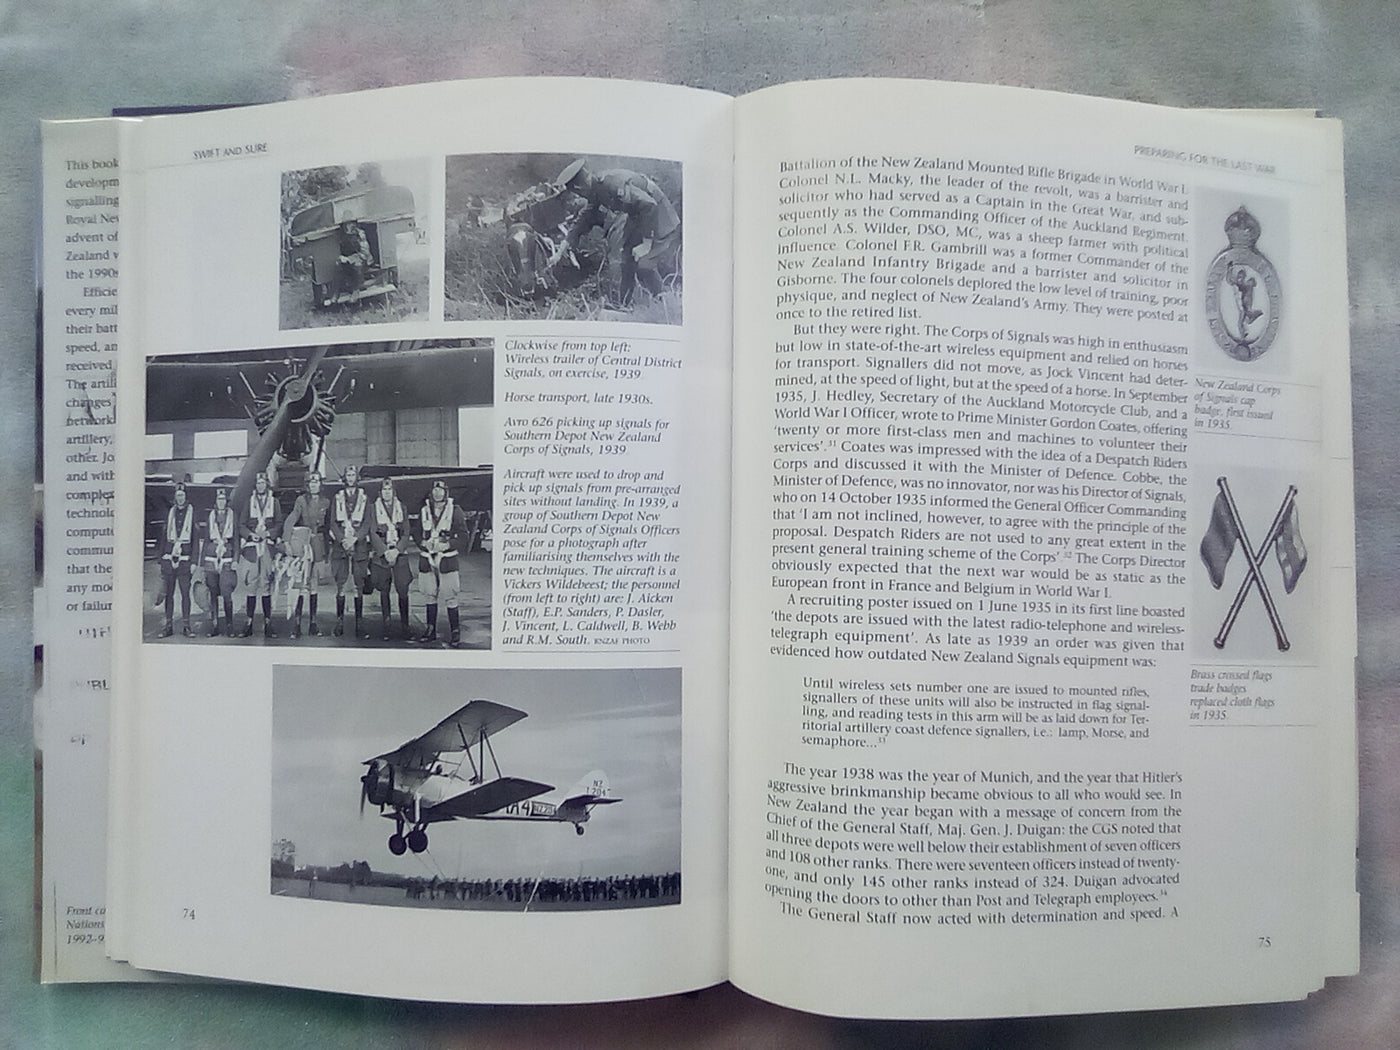 Swift and Sure - A History of Royal New Zealand Army Signalling Corps